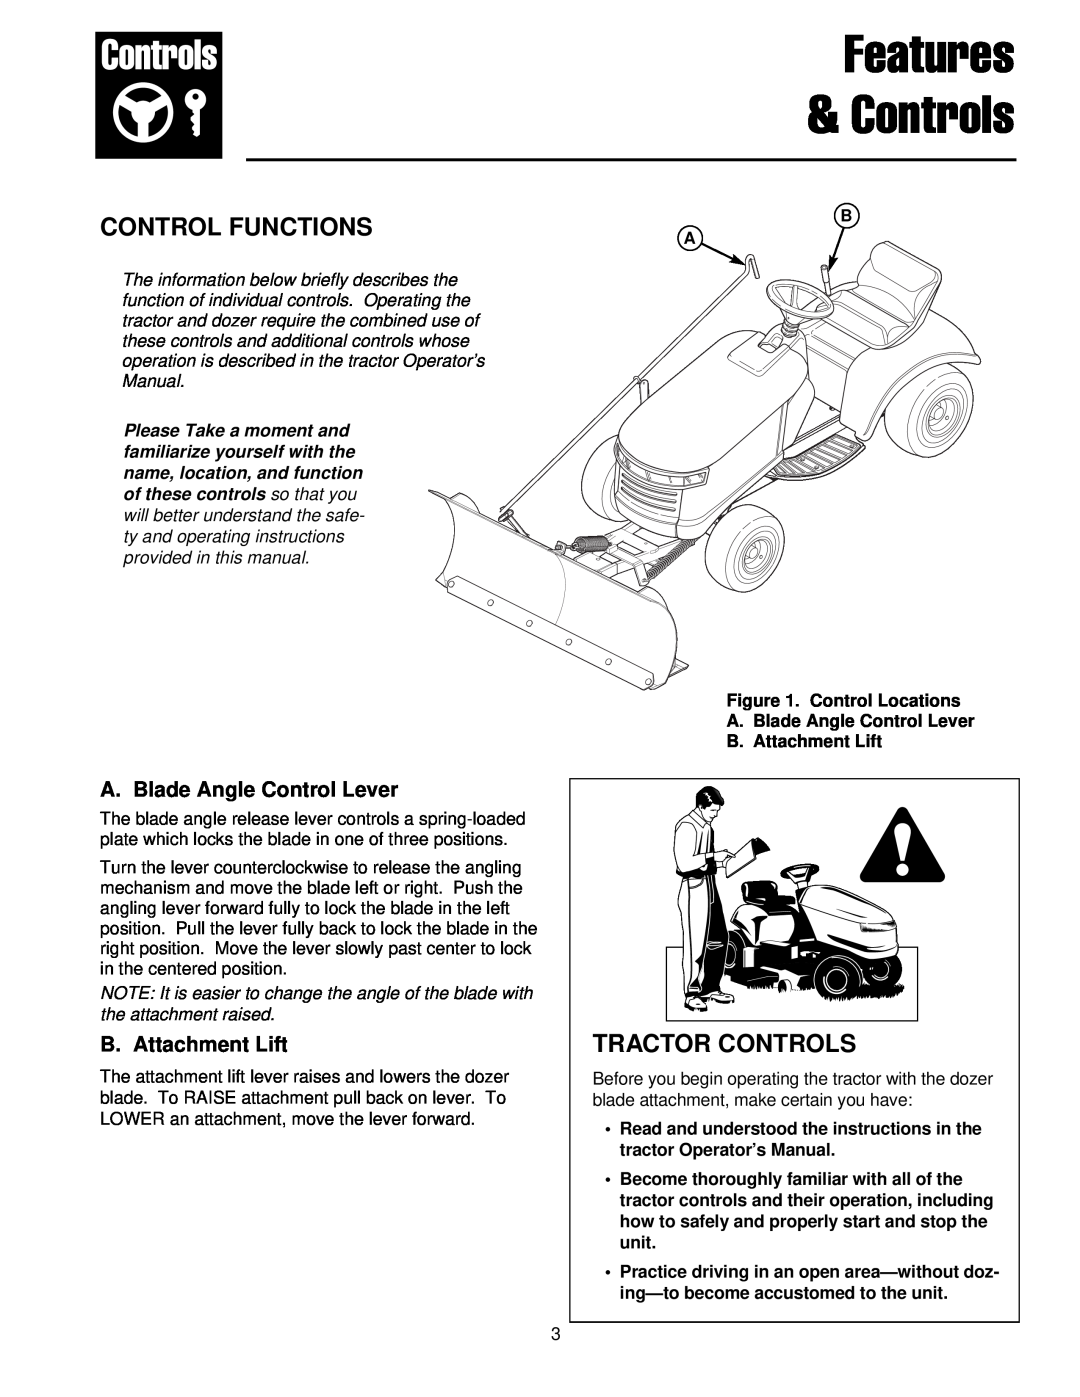 Briggs & Stratton 1694919 manual Control Functions, Tractor Controls, A. Blade Angle Control Lever, B. Attachment Lift 